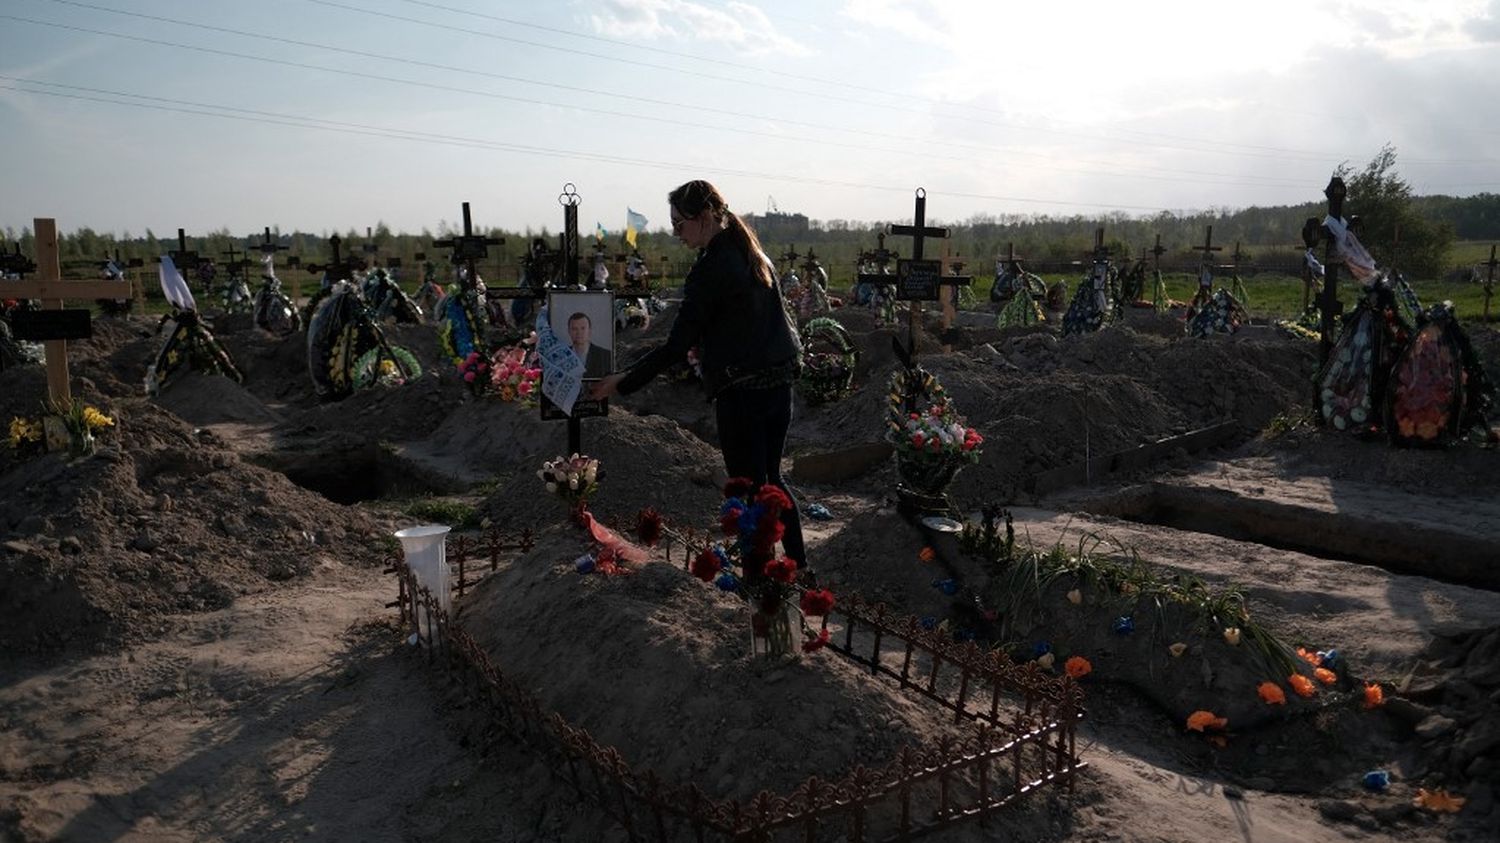 War in Ukraine: independent report finds 'very serious risk of genocide' of Ukrainians by Russia
